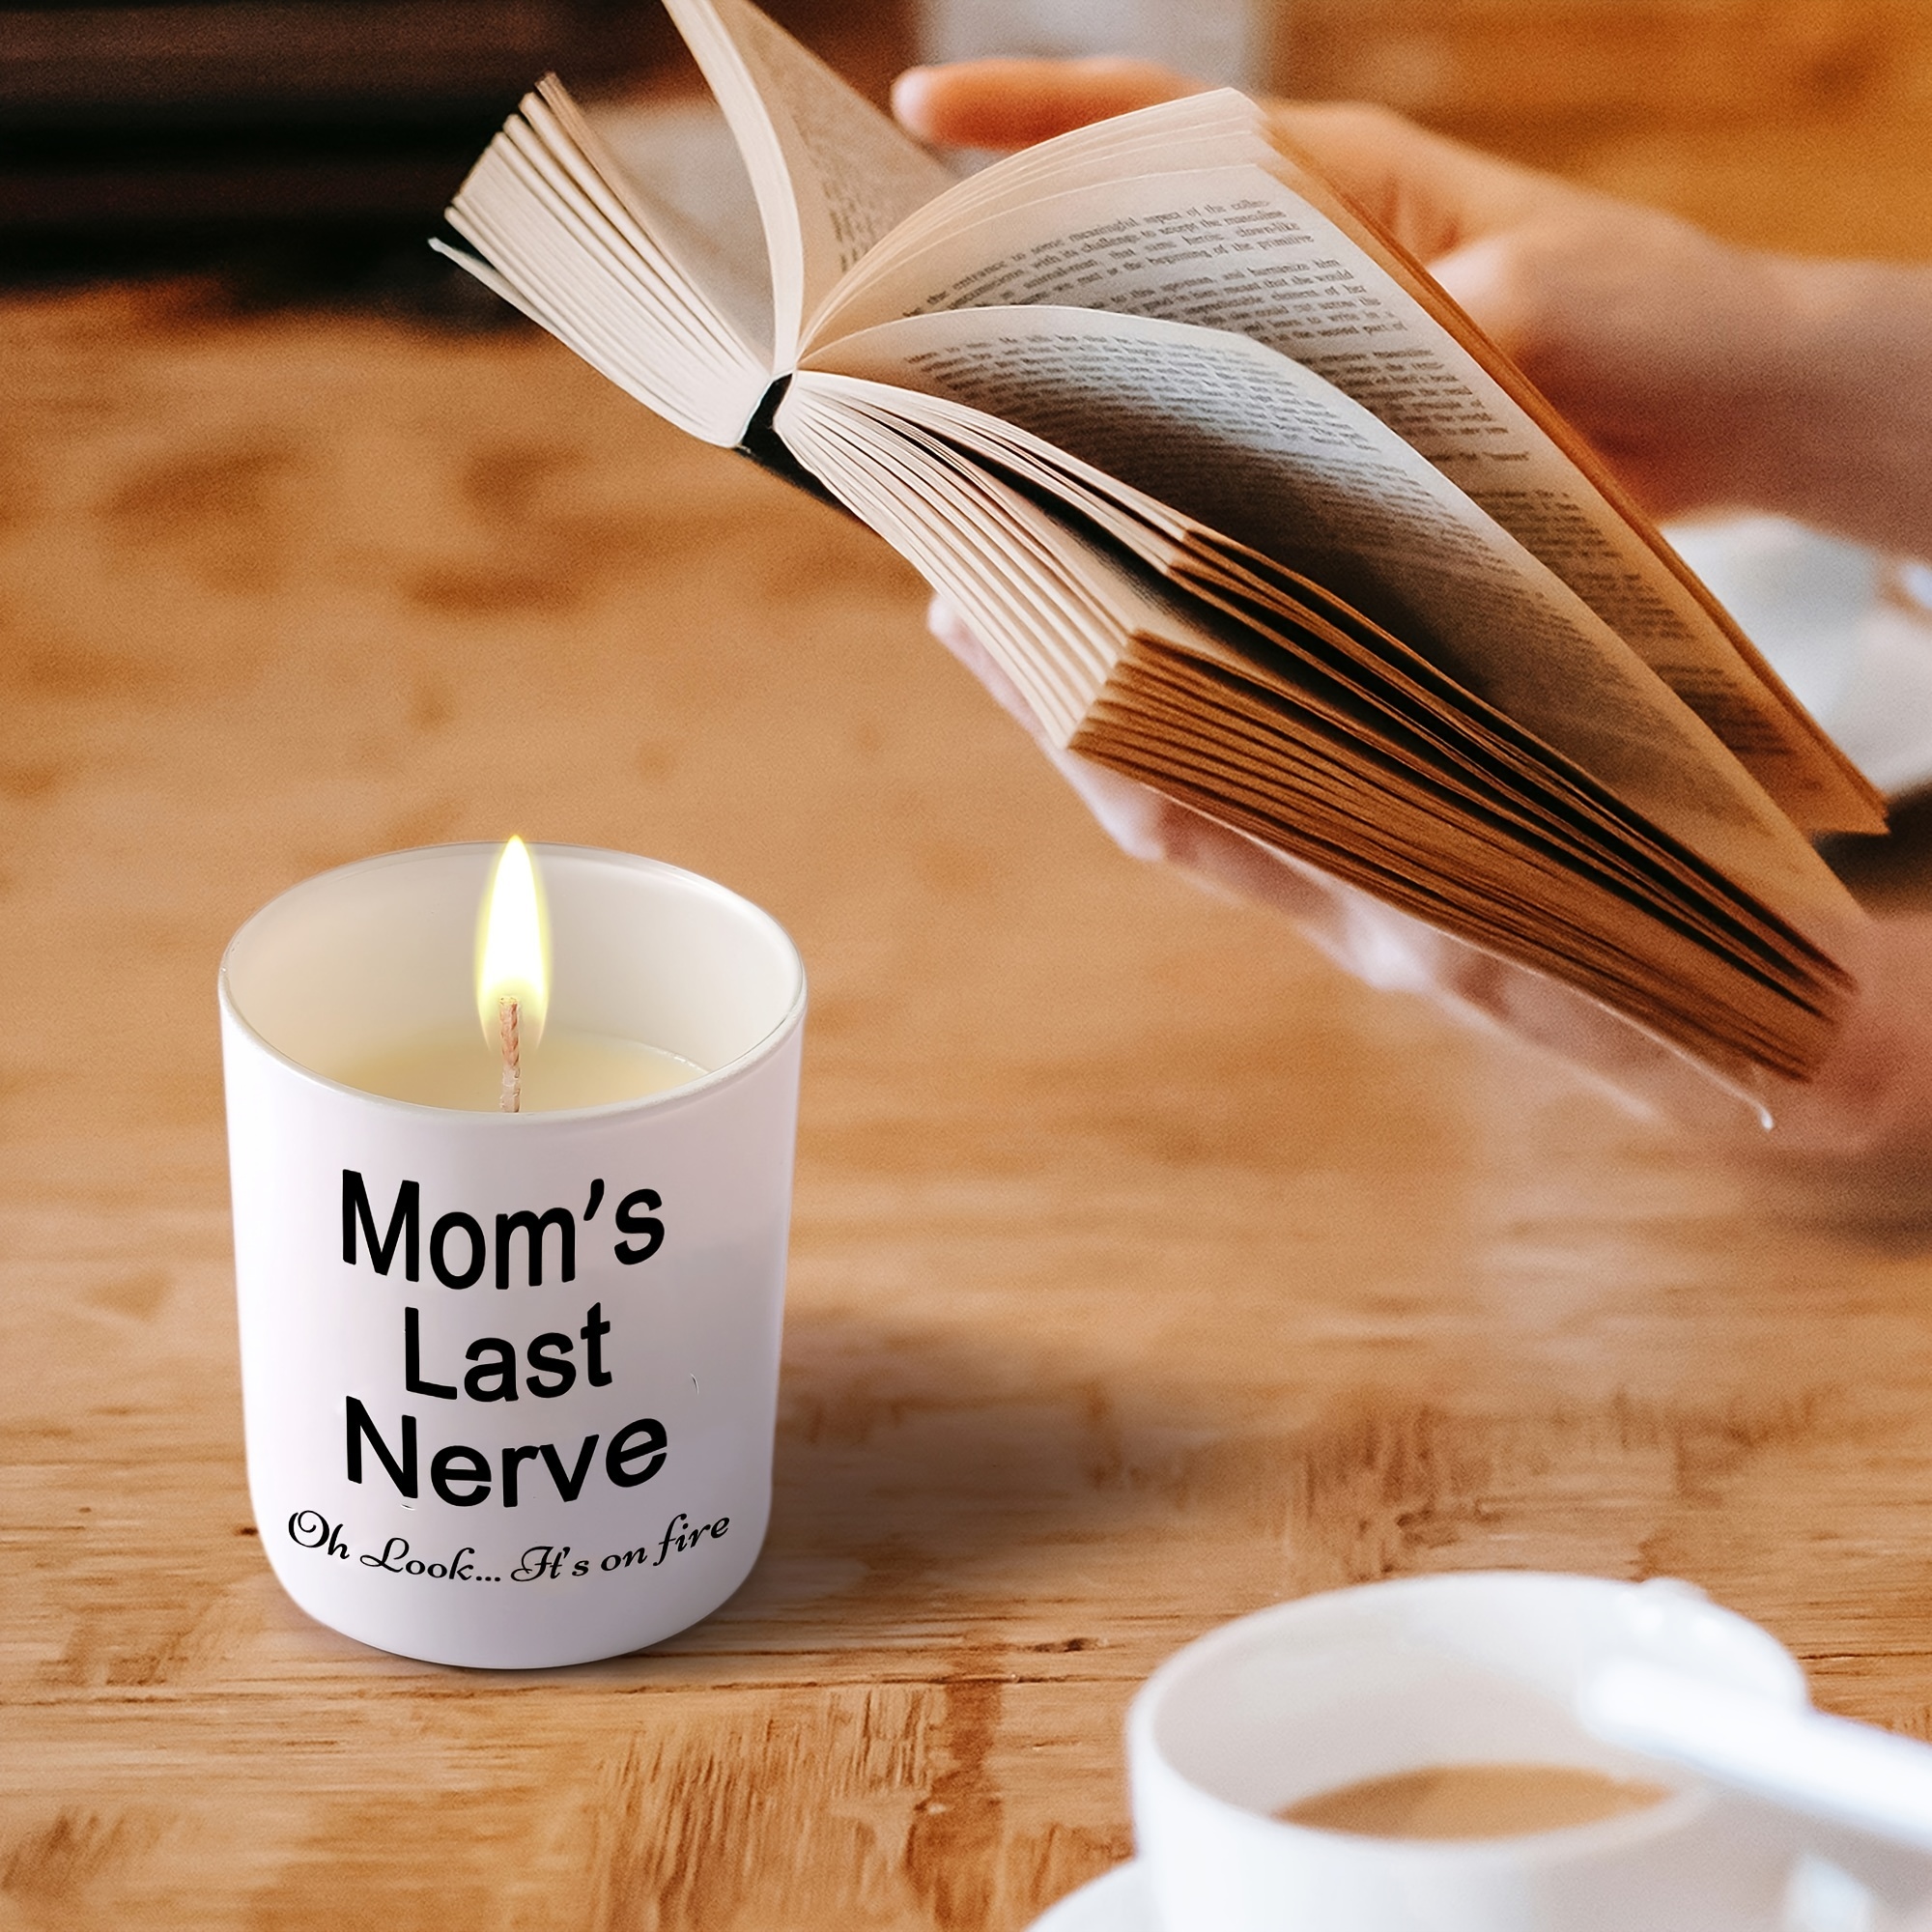 Birthday Gifts for Mom from Daughters Funny Moms Gifts Presents for Mom Birthday Gift Ideas Best Mom Ever Gifts from Daughter Son Kids Great Mother